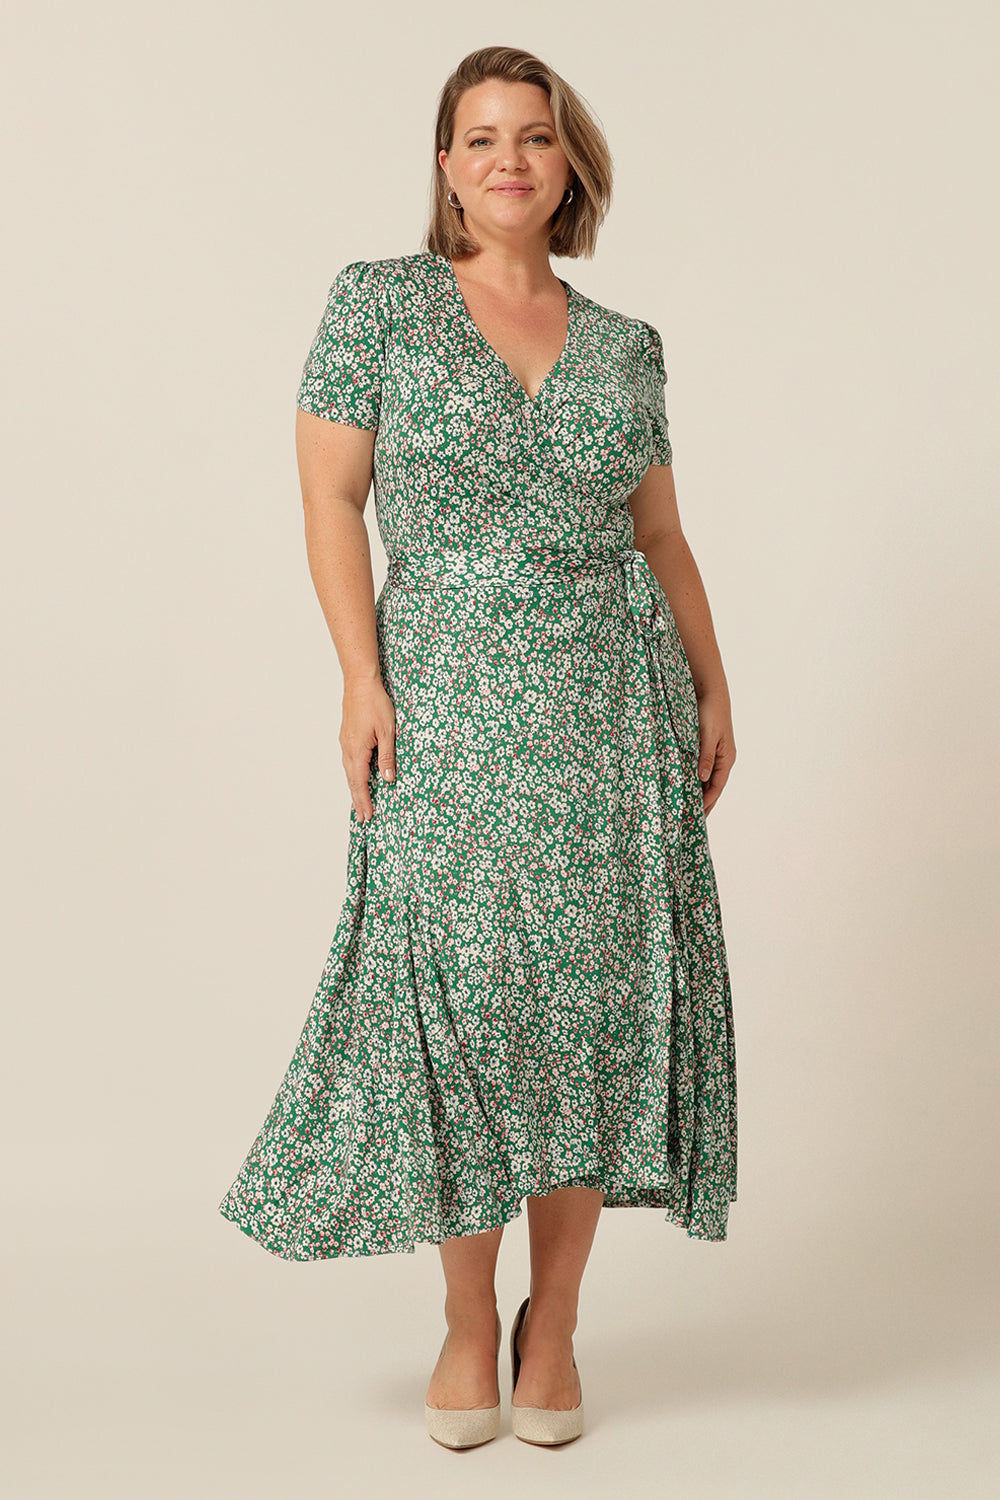 wrap jersey dress with gathered short sleeves and full skirt - best dress for summer occasionwear  and weddings. Made in Australia for petite to plus sizes.